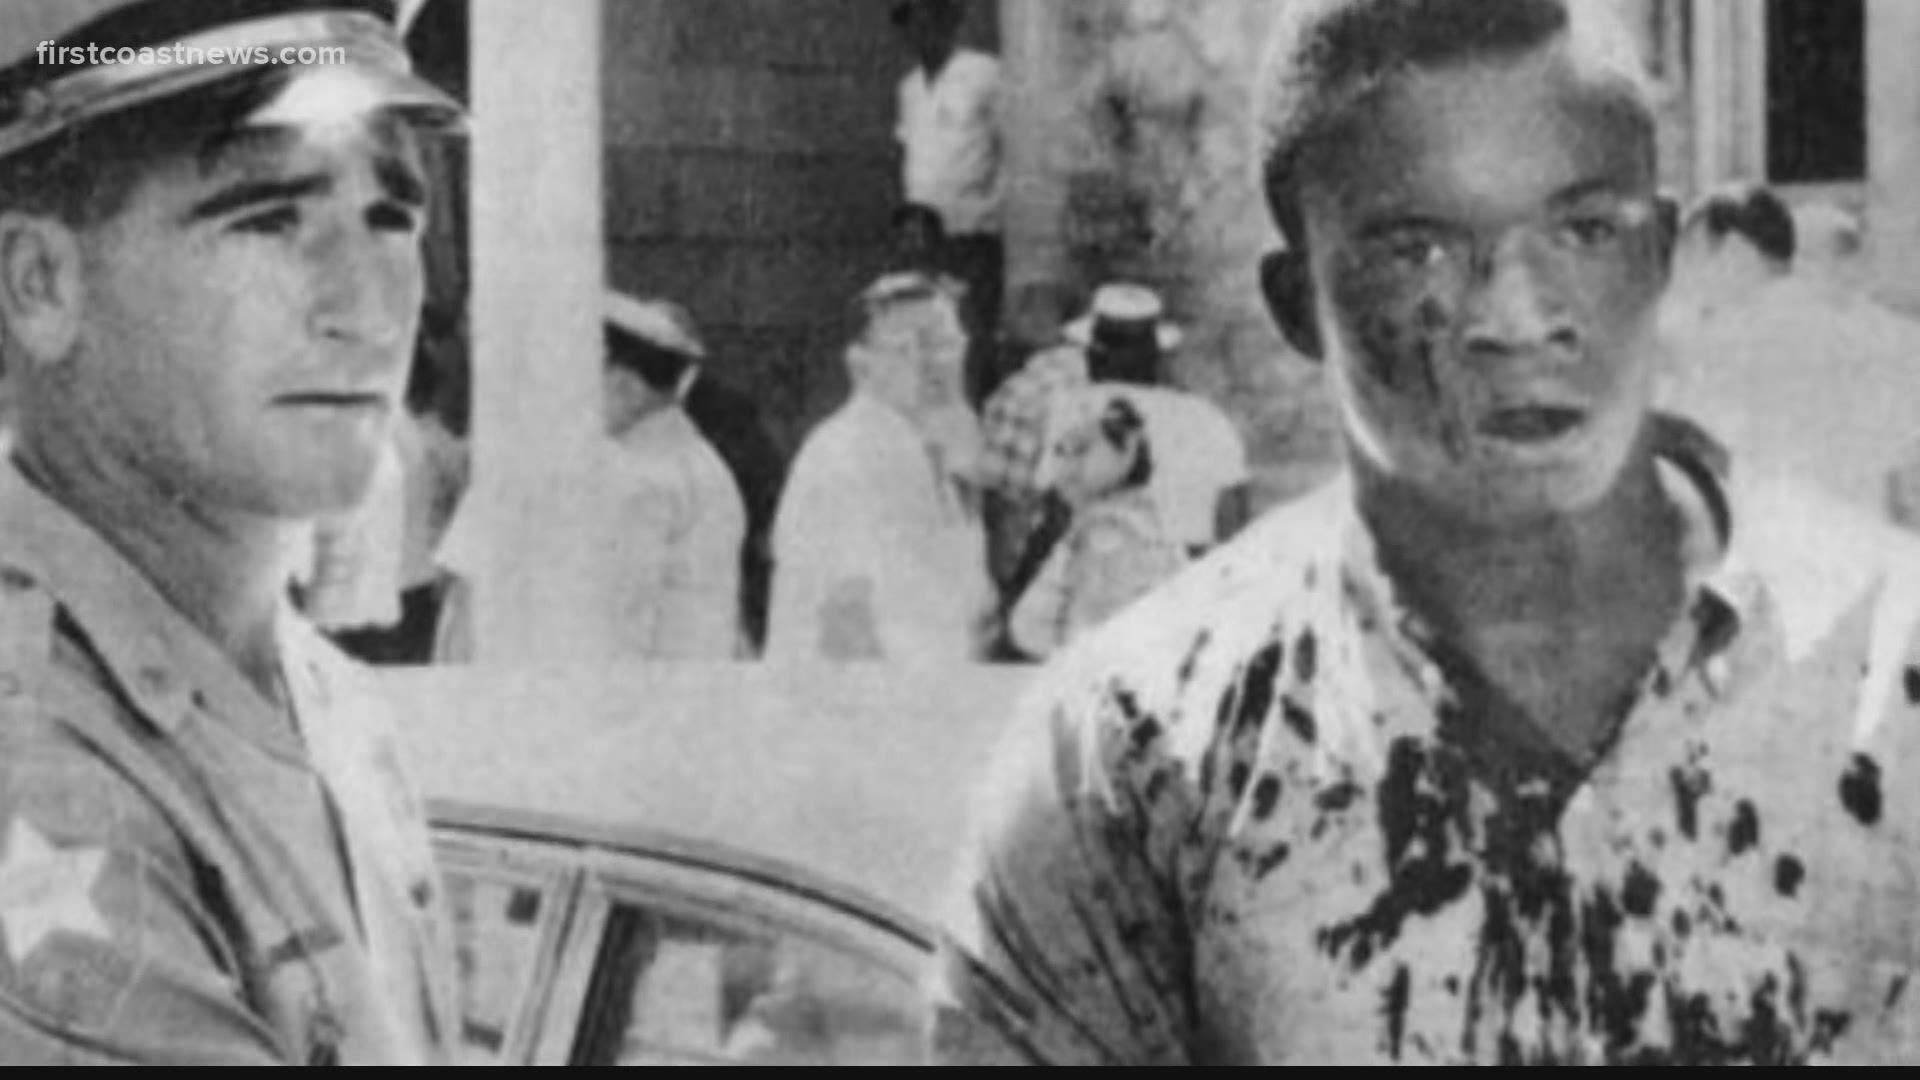 On Aug. 27, 1960, young Black Civil Rights activists were attacked by white men wielding ax handles in the park then known as Hemming Park.